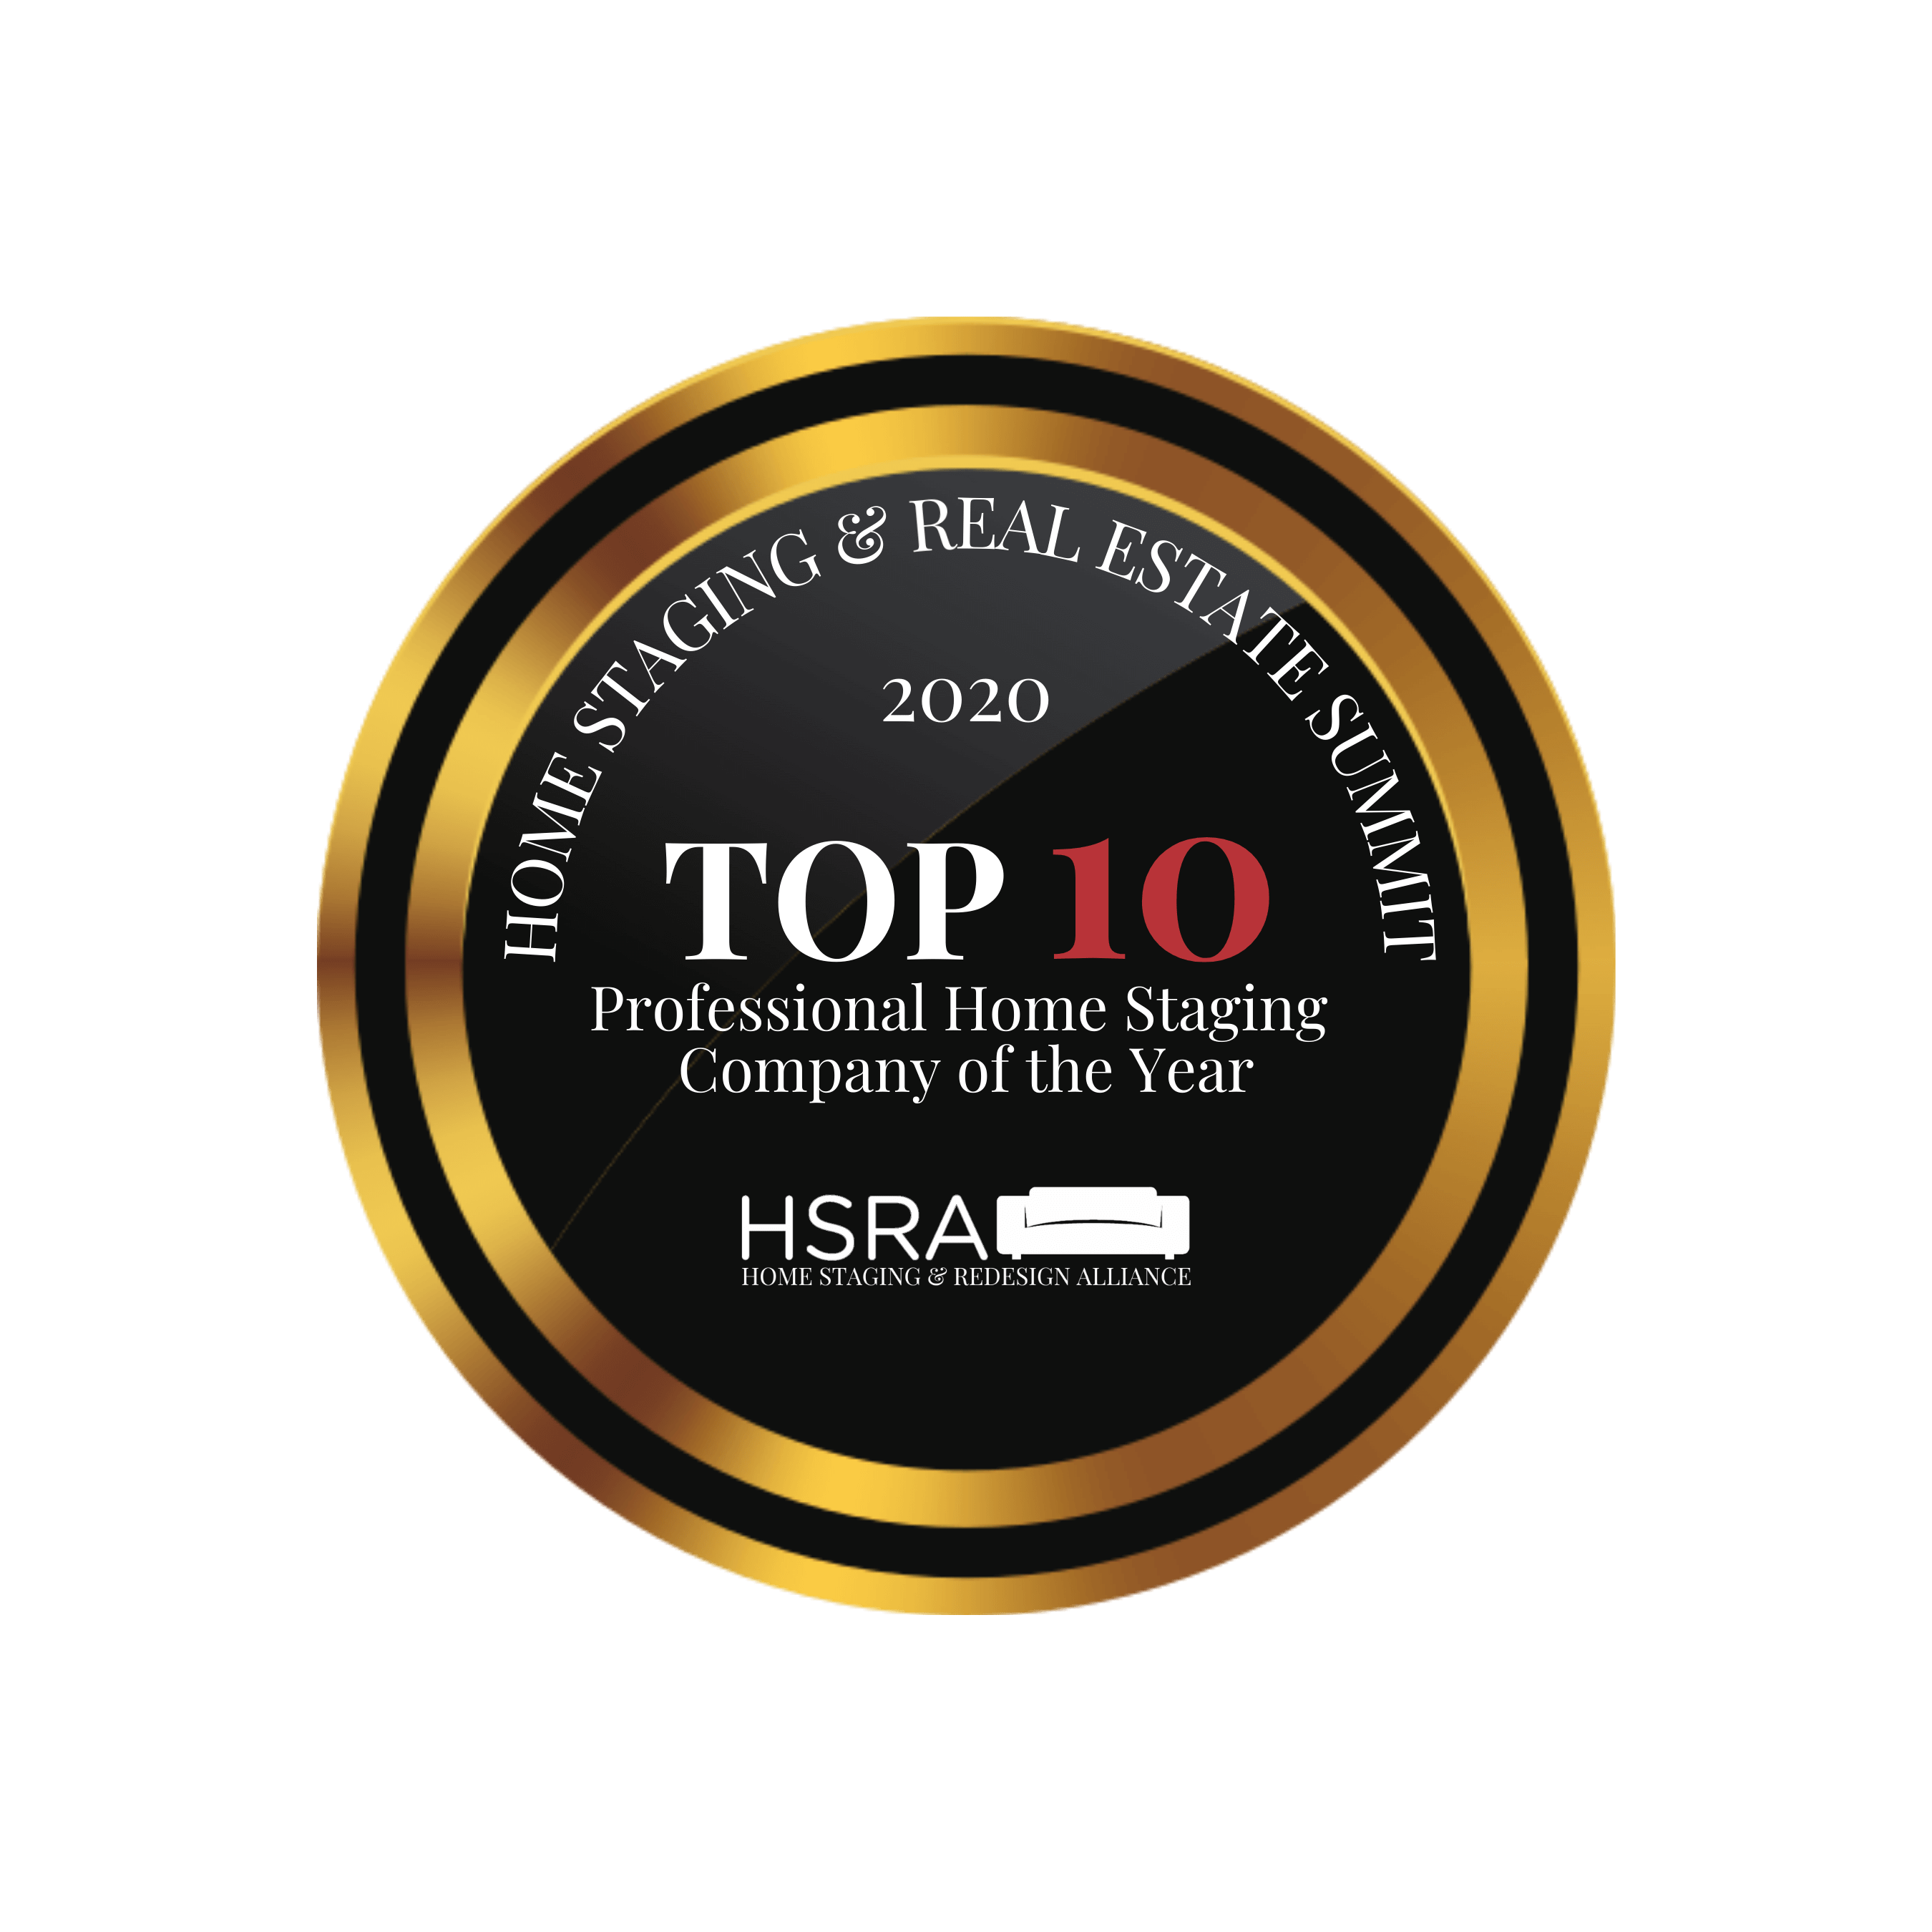 2020 HSRA Top 10 Professional Home Staging Company of the Year